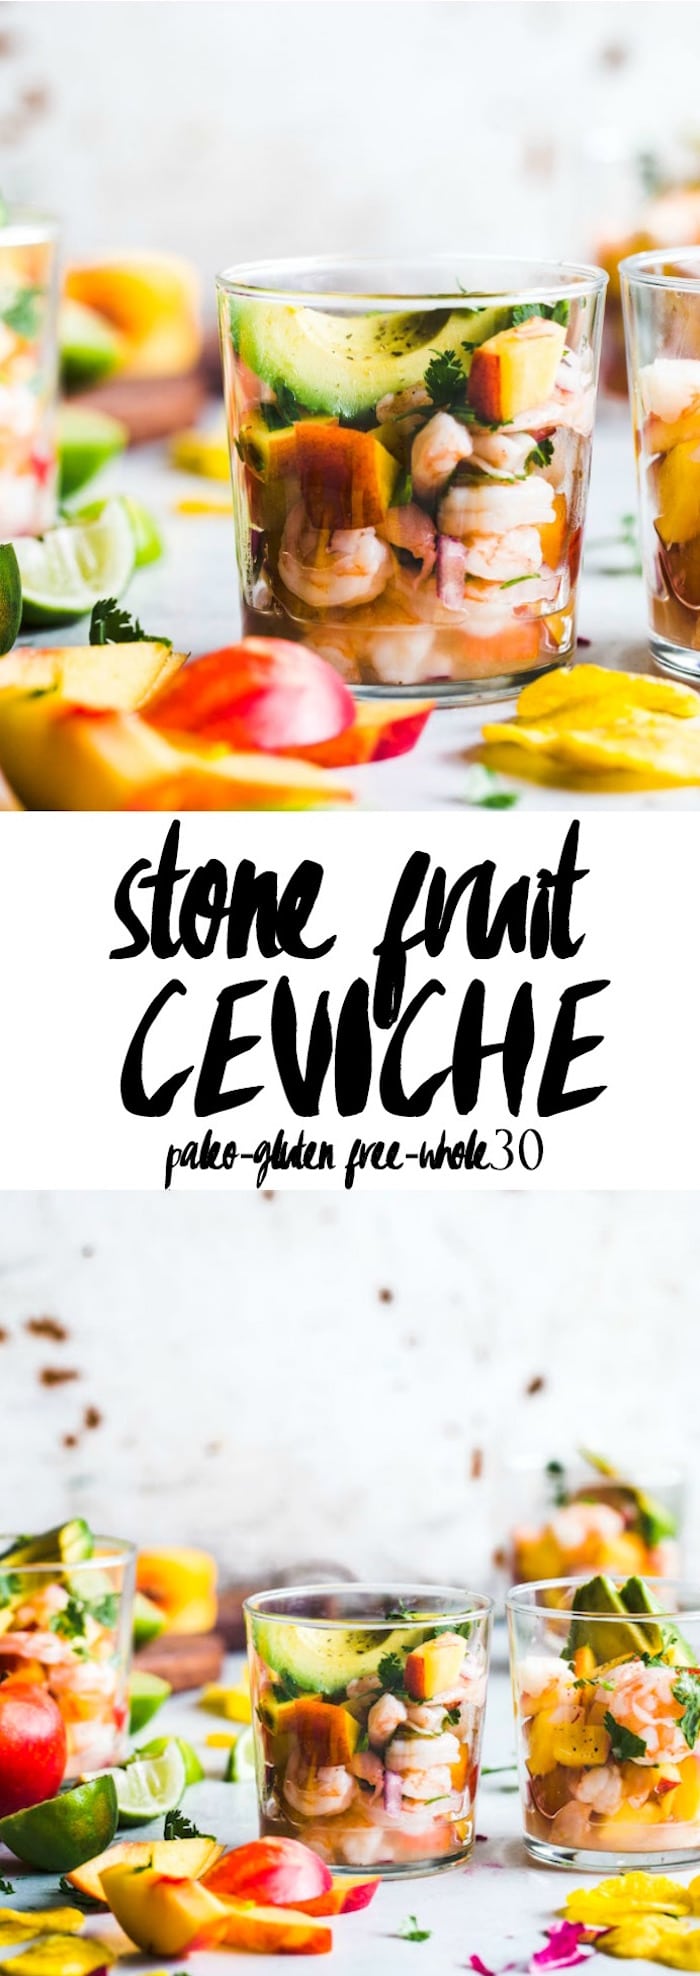 Stone Fruit Ceviche featuring peaches, plums and shrimp | #whole30 | thealmondeater.com